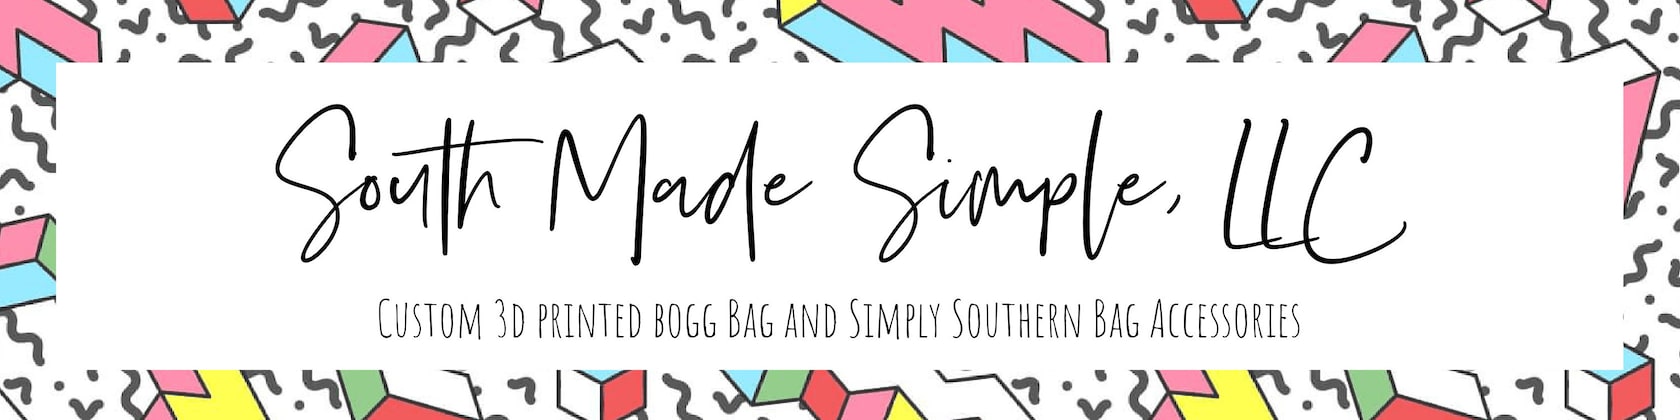 15 Genius Bogg Bag Accessories to Have This Summer